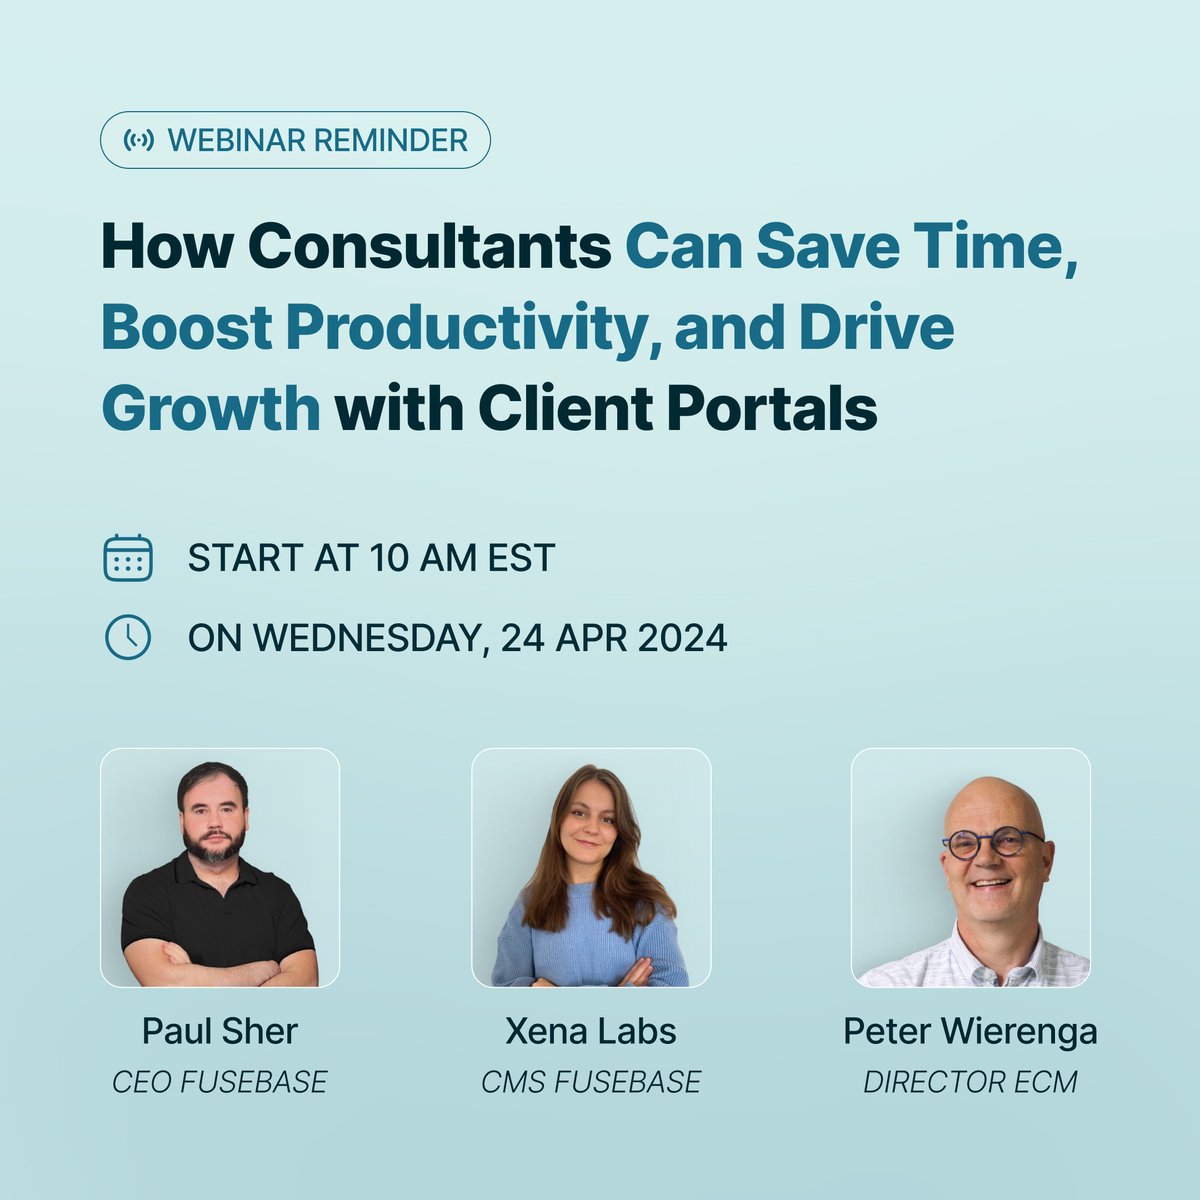 We have a webinar coming up soon! Don't miss the opportunity to gain valuable insights from Peter Wierenga, an experienced consultant and ECM Director.
📅: April 24th
⏰: 10:00 АM EST
🎥: Record is available 
Register via the link: hubs.ly/Q02tCrWx0 
#MarketingEvents